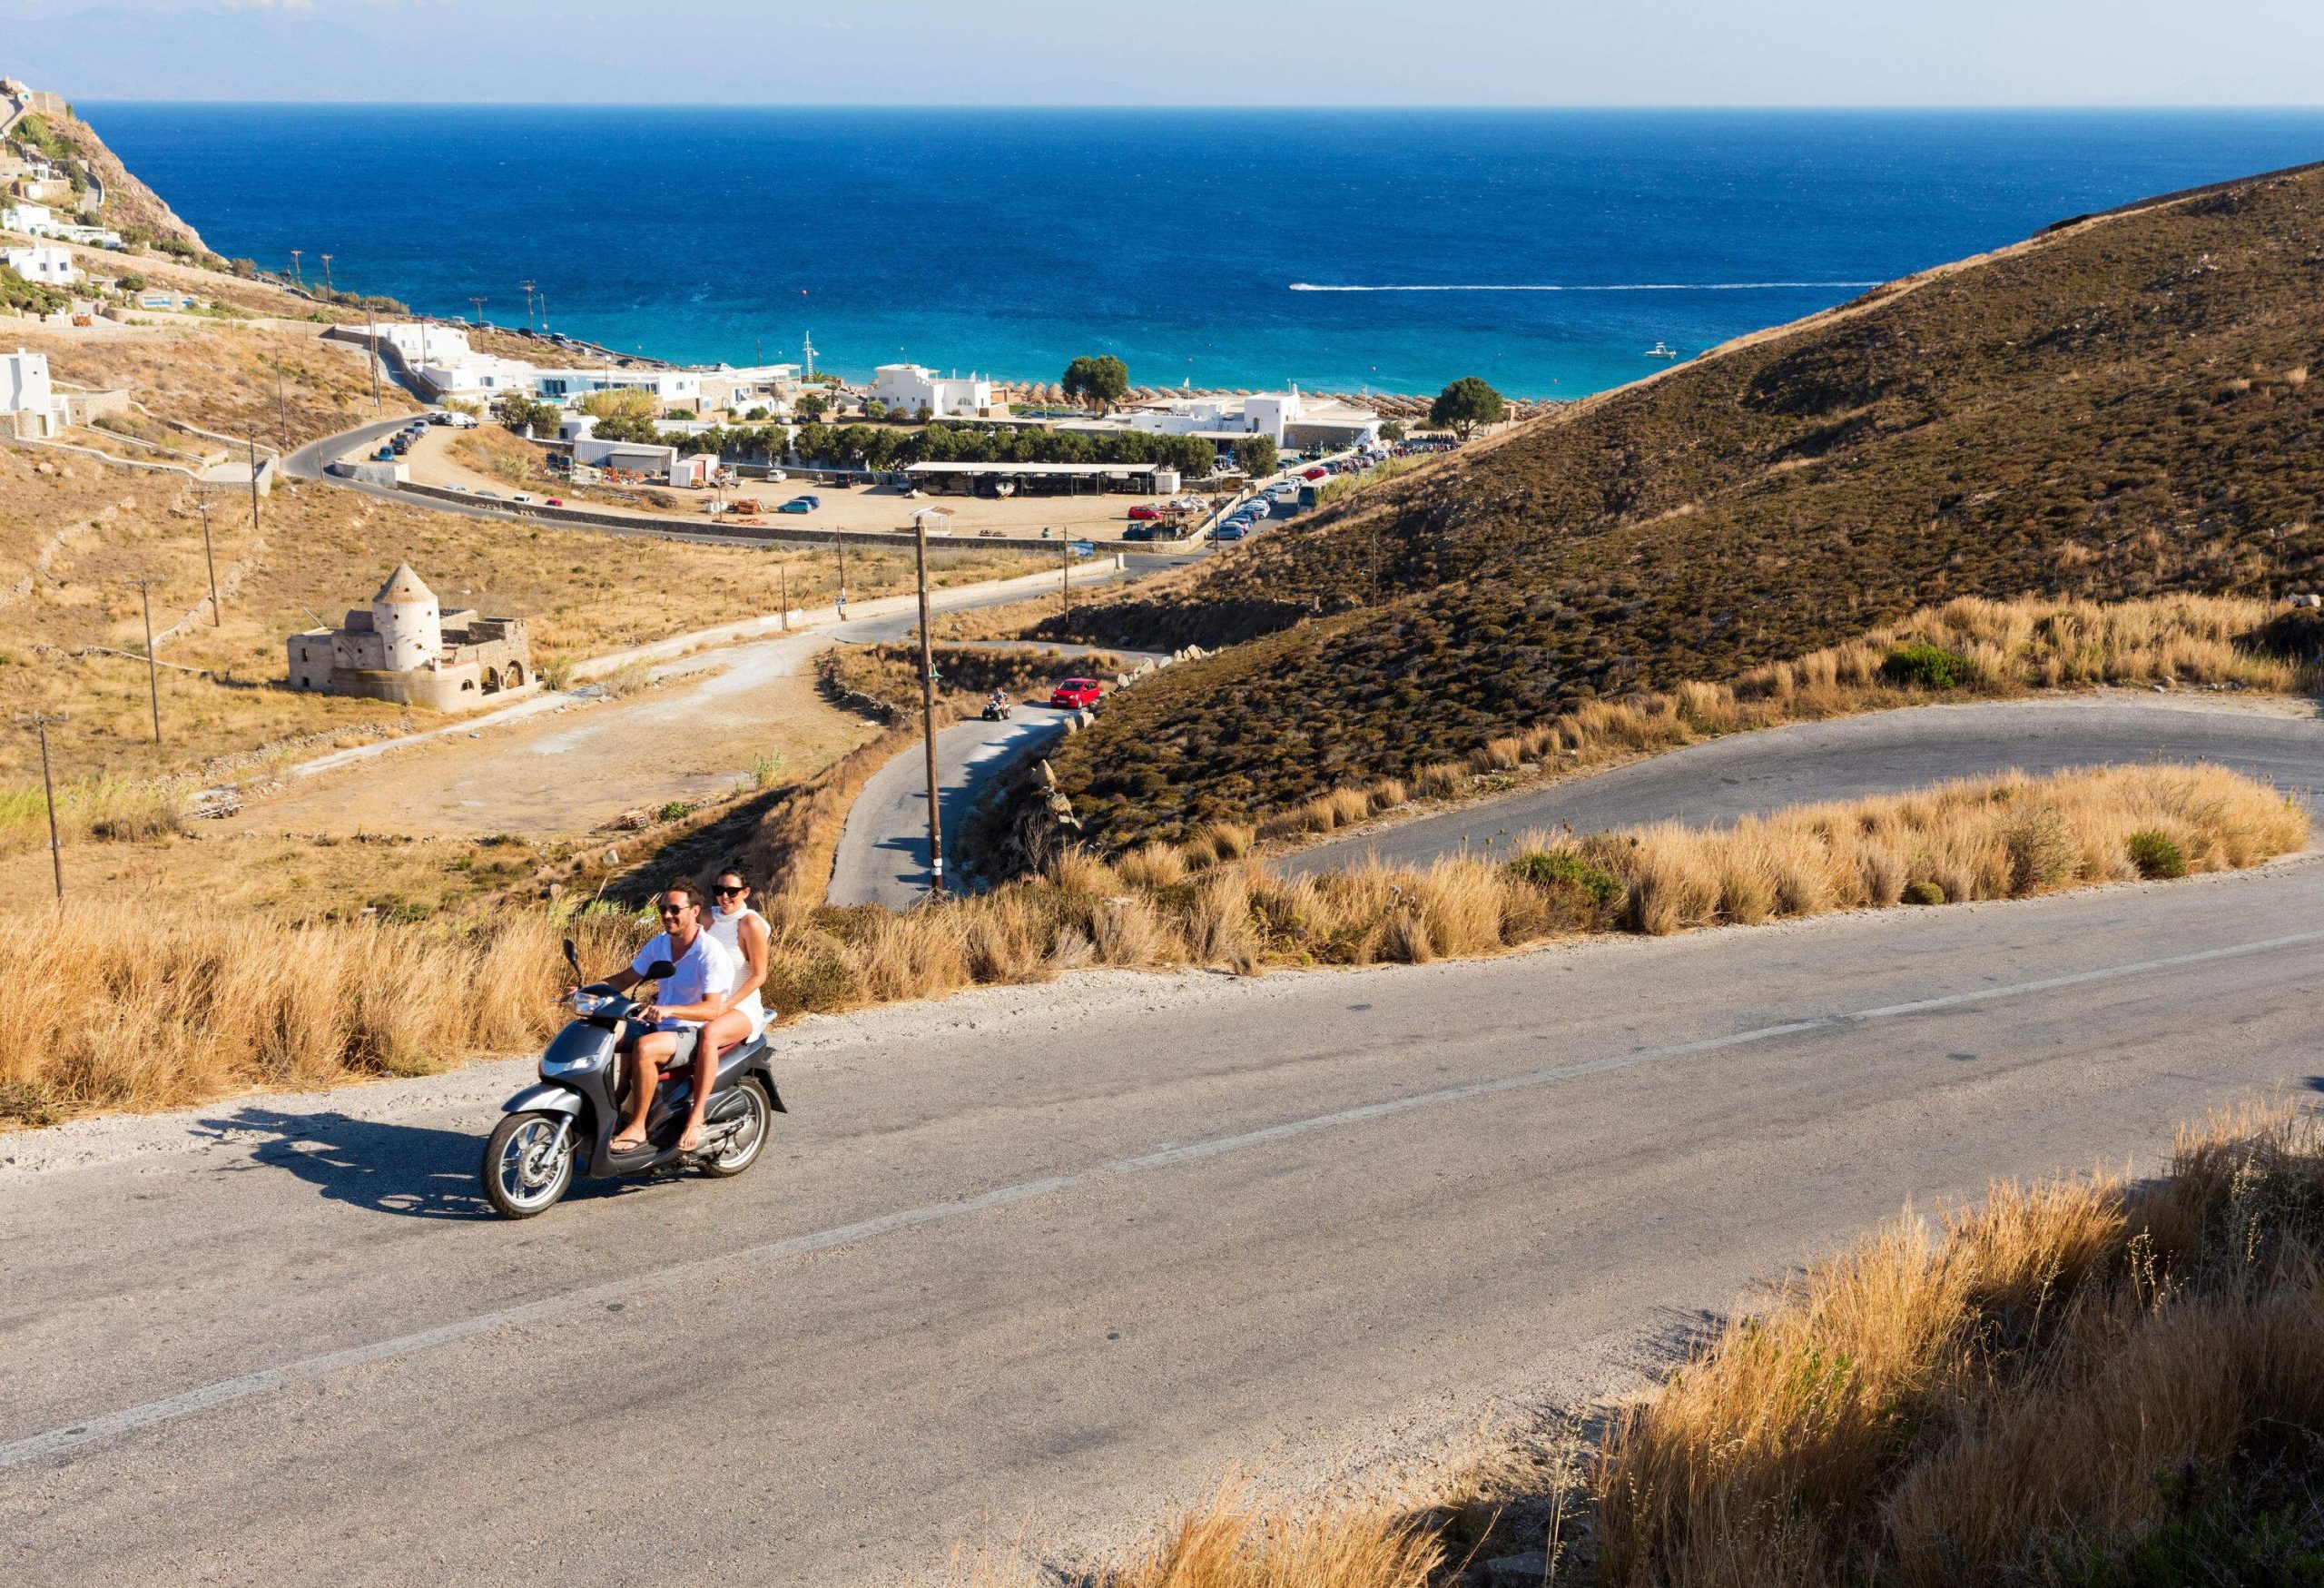 A couple riding on a scooter traveling on a roadway across a hill with the sea in the background.